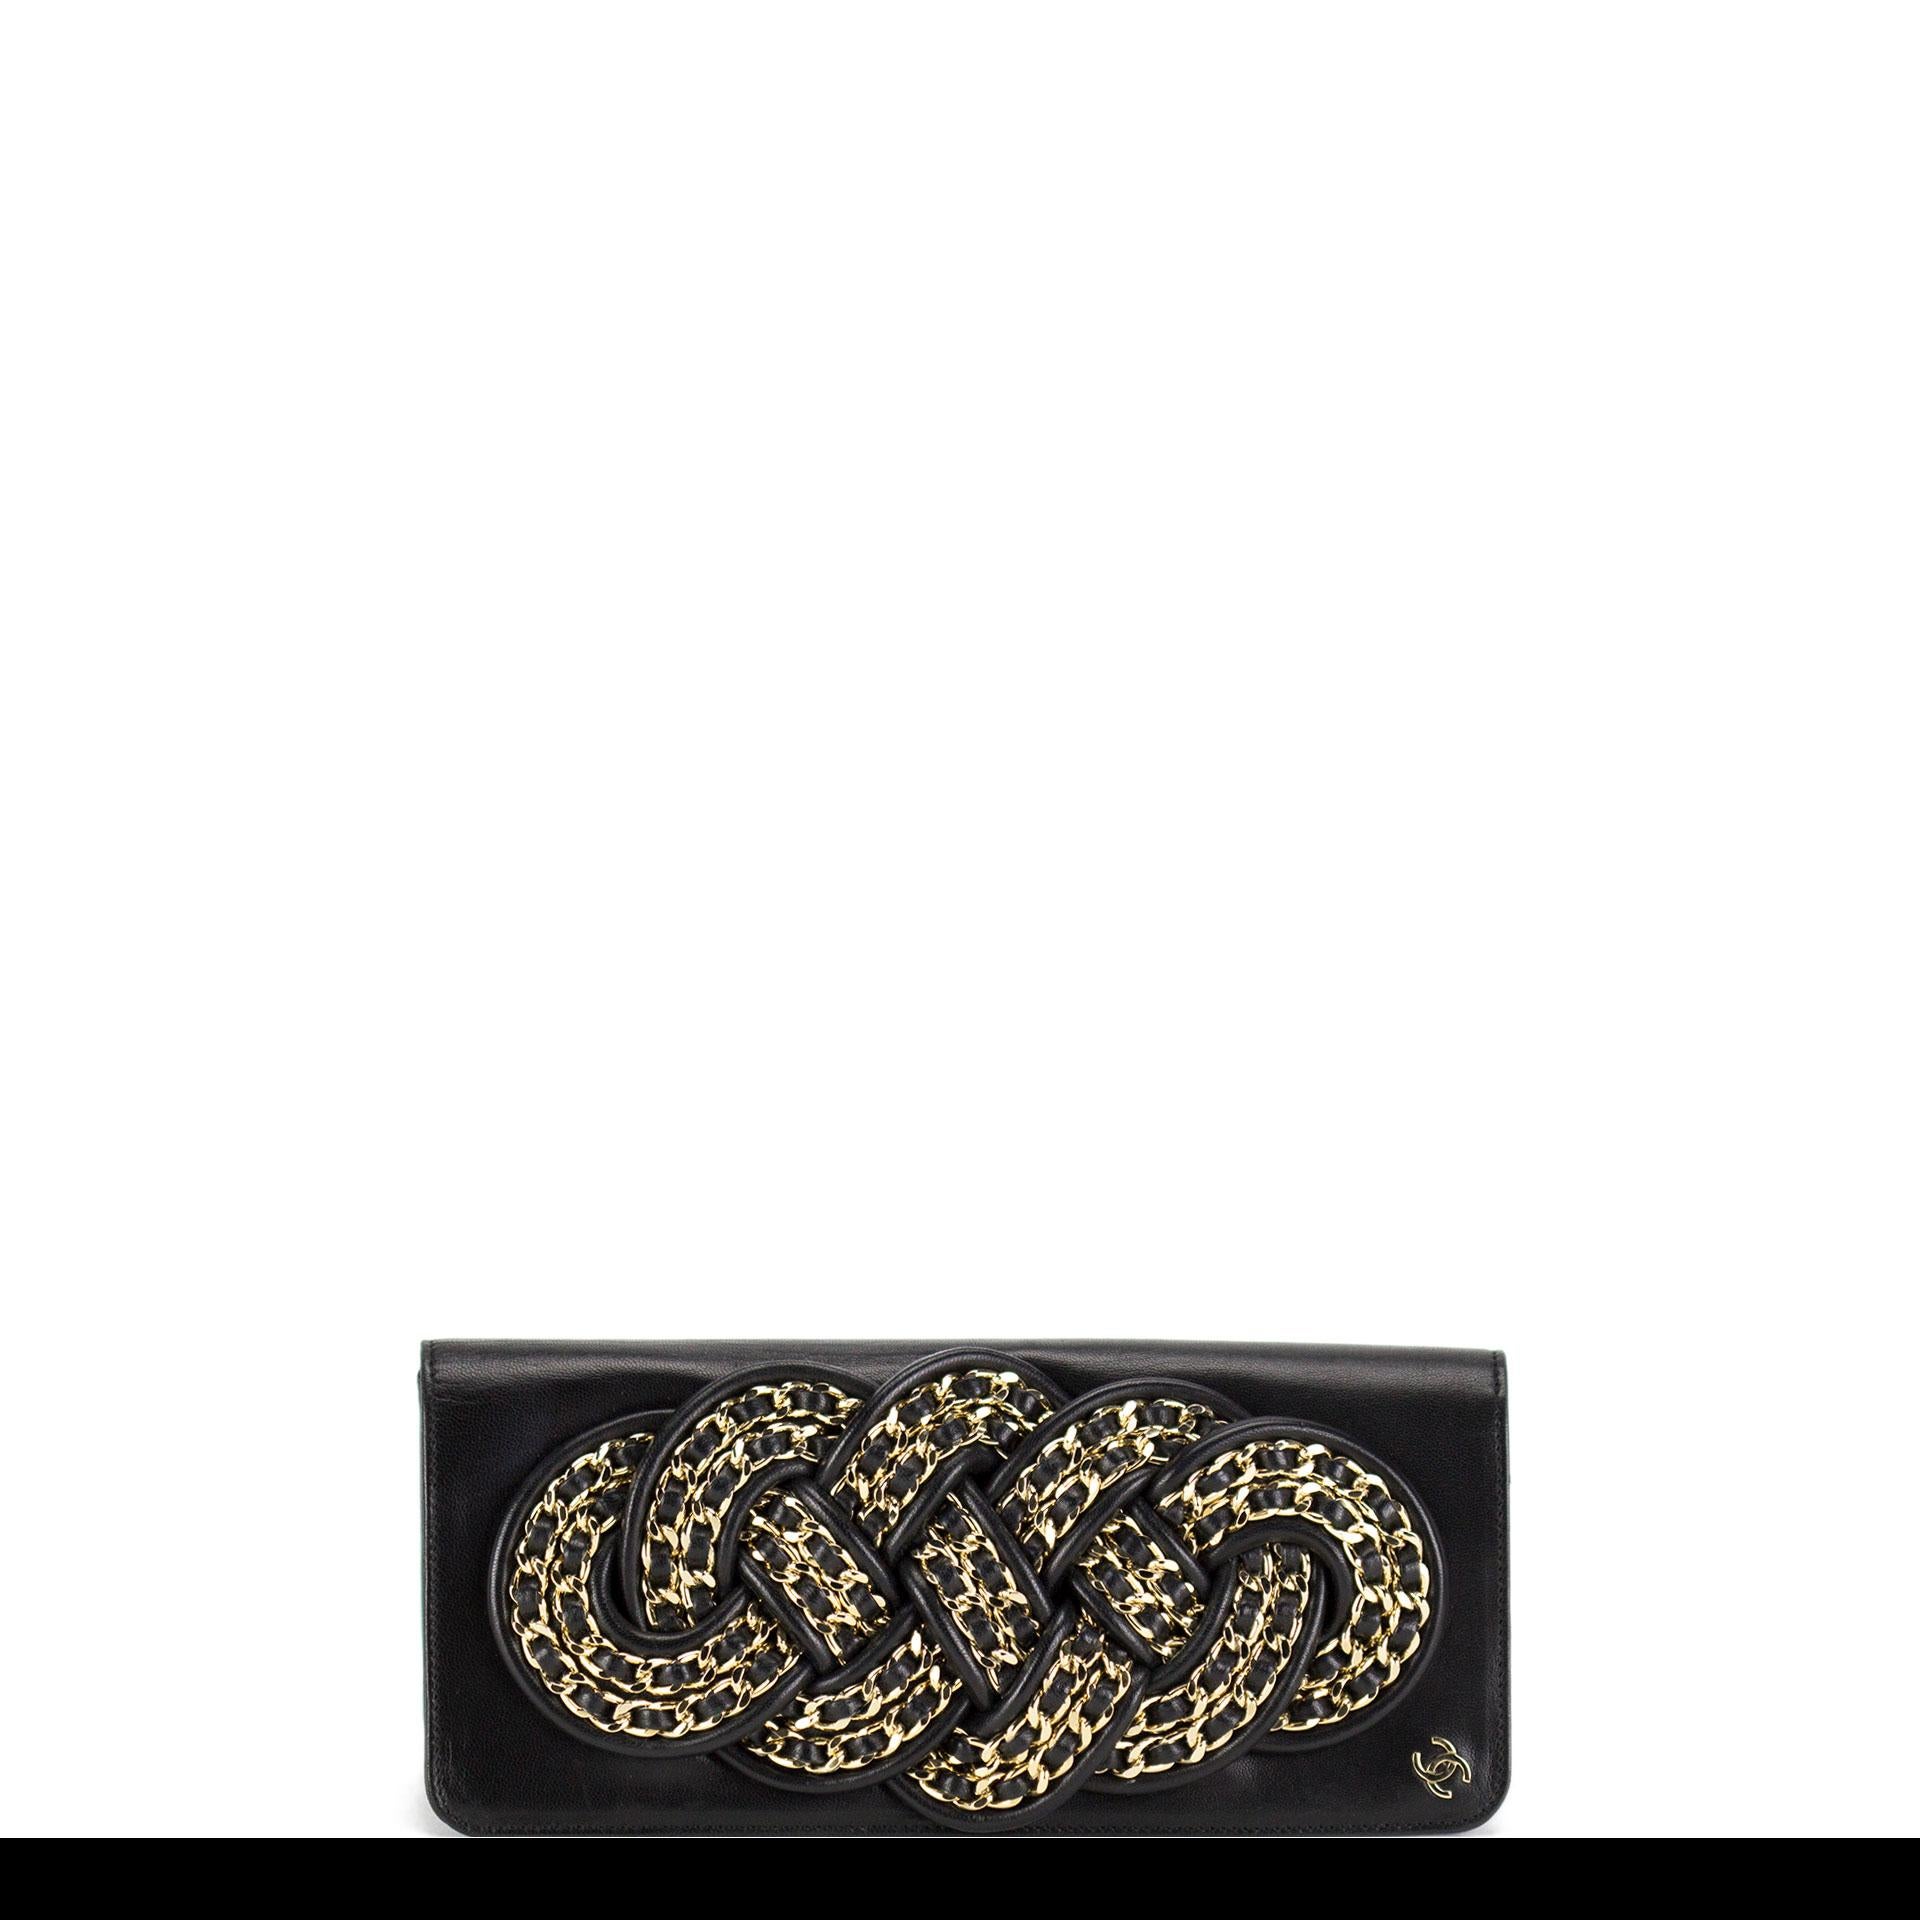 Chanel 2008 Gold Twisted Iconic Chain Braided Knotted Rare Black Lambskin Clutch For Sale 5